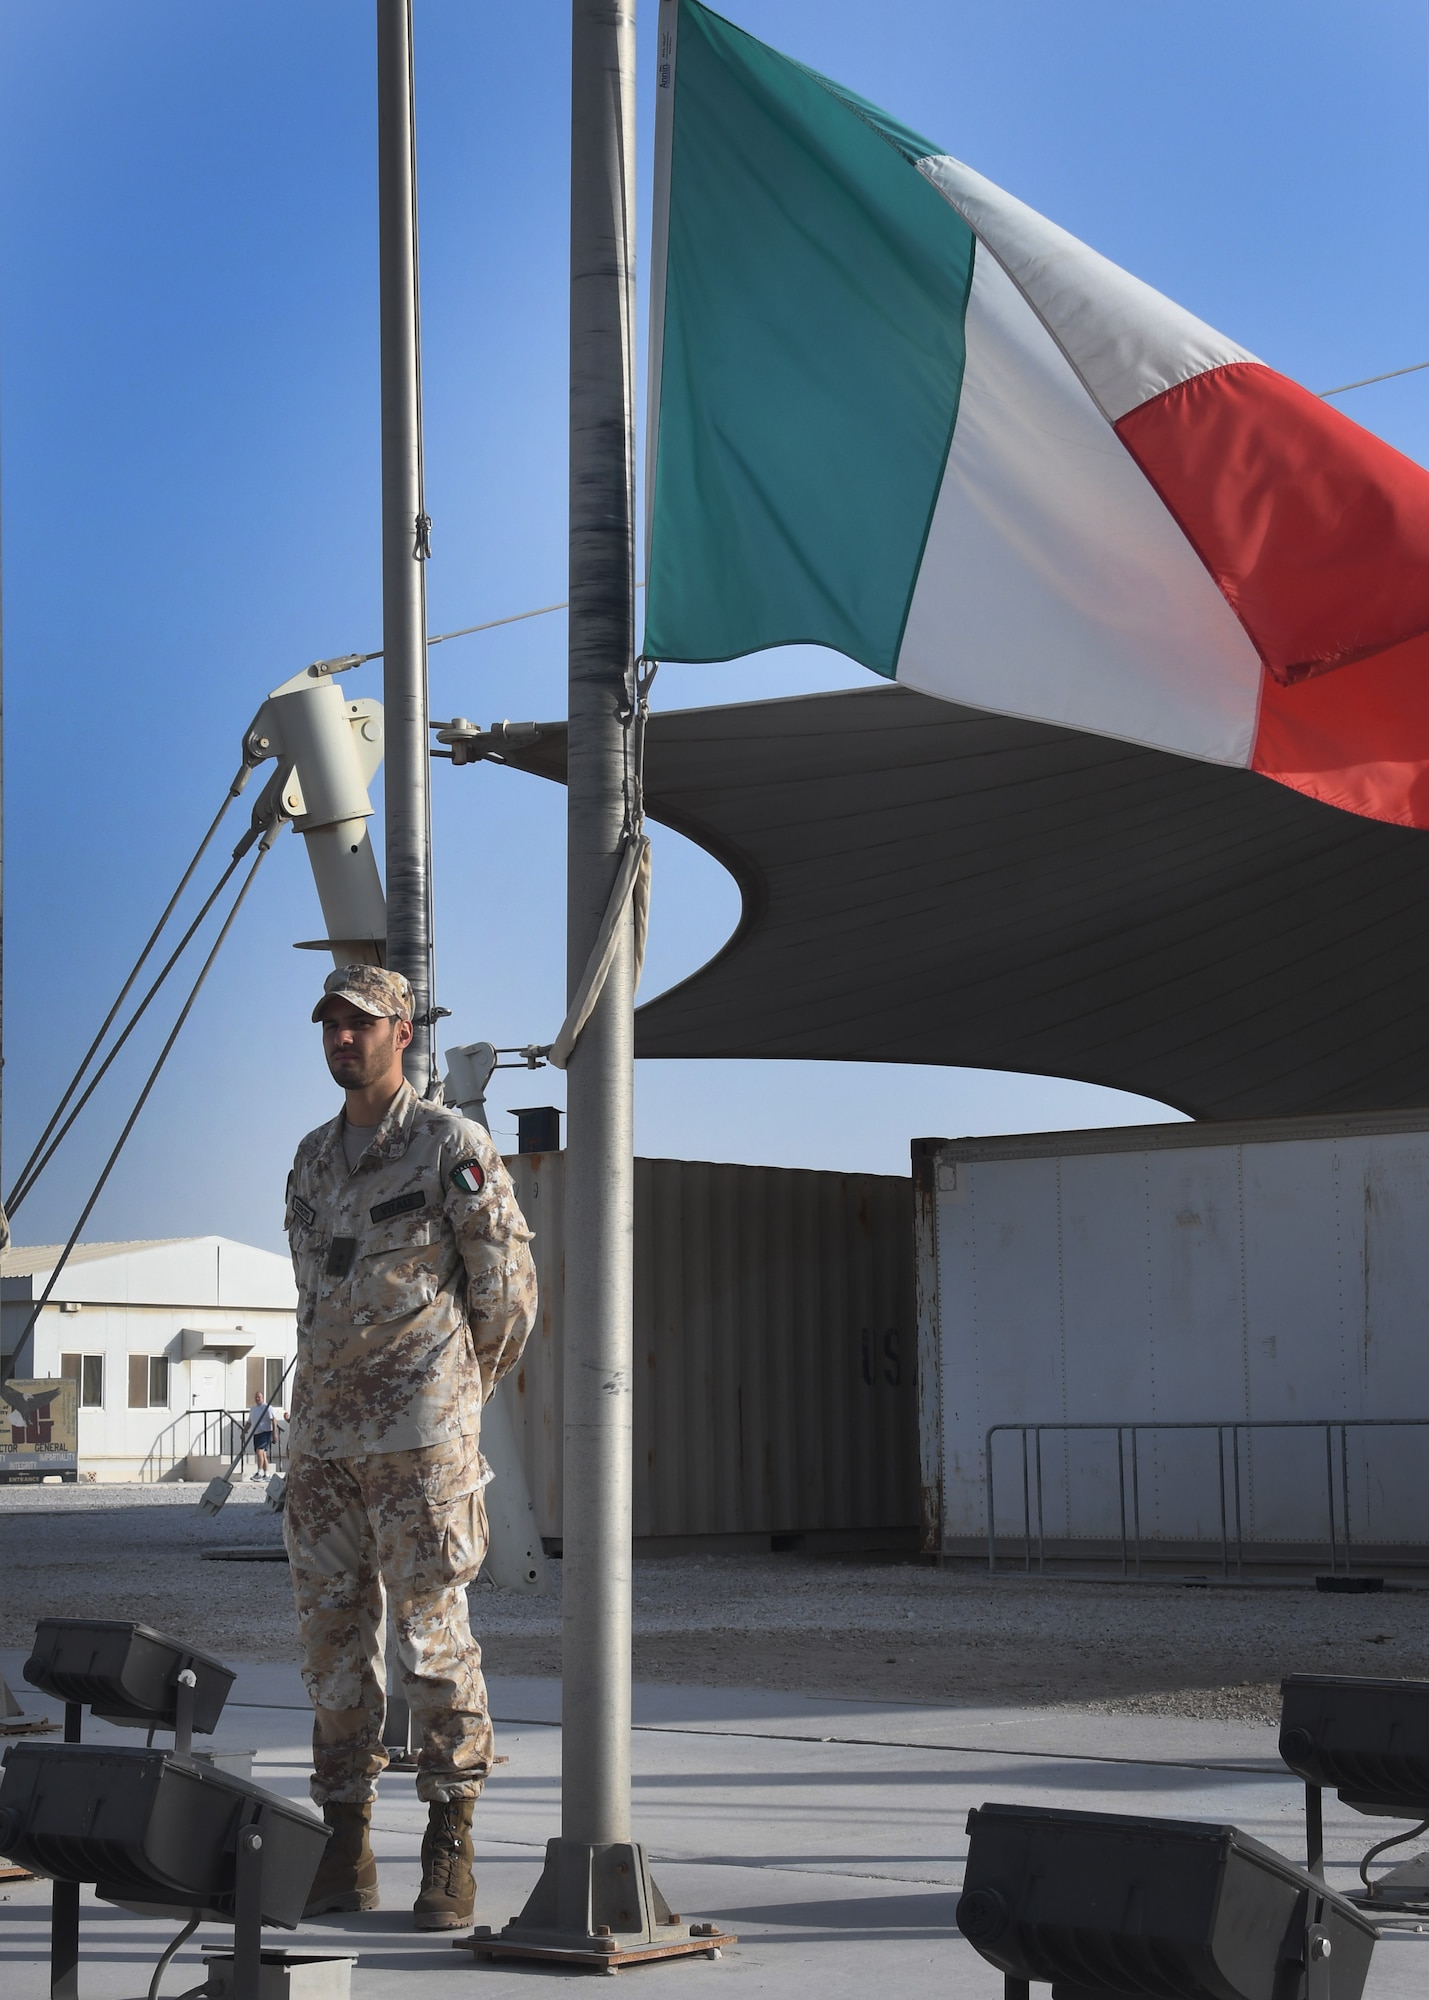 1st Lt. Alberto Vitale of the Italian Detachment at the Combined Air Operations Center stands with the Italian flag at Al Udeid Air Base, Qatar, Nov. 4, 2016. The Italian flag was lowered and then raised during a ceremony for Italian Armed Forces Day, celebrating the allied victory of World War I and commemorating the lives of all those who served. (U.S. Air Force photo by Senior Airman Miles Wilson)